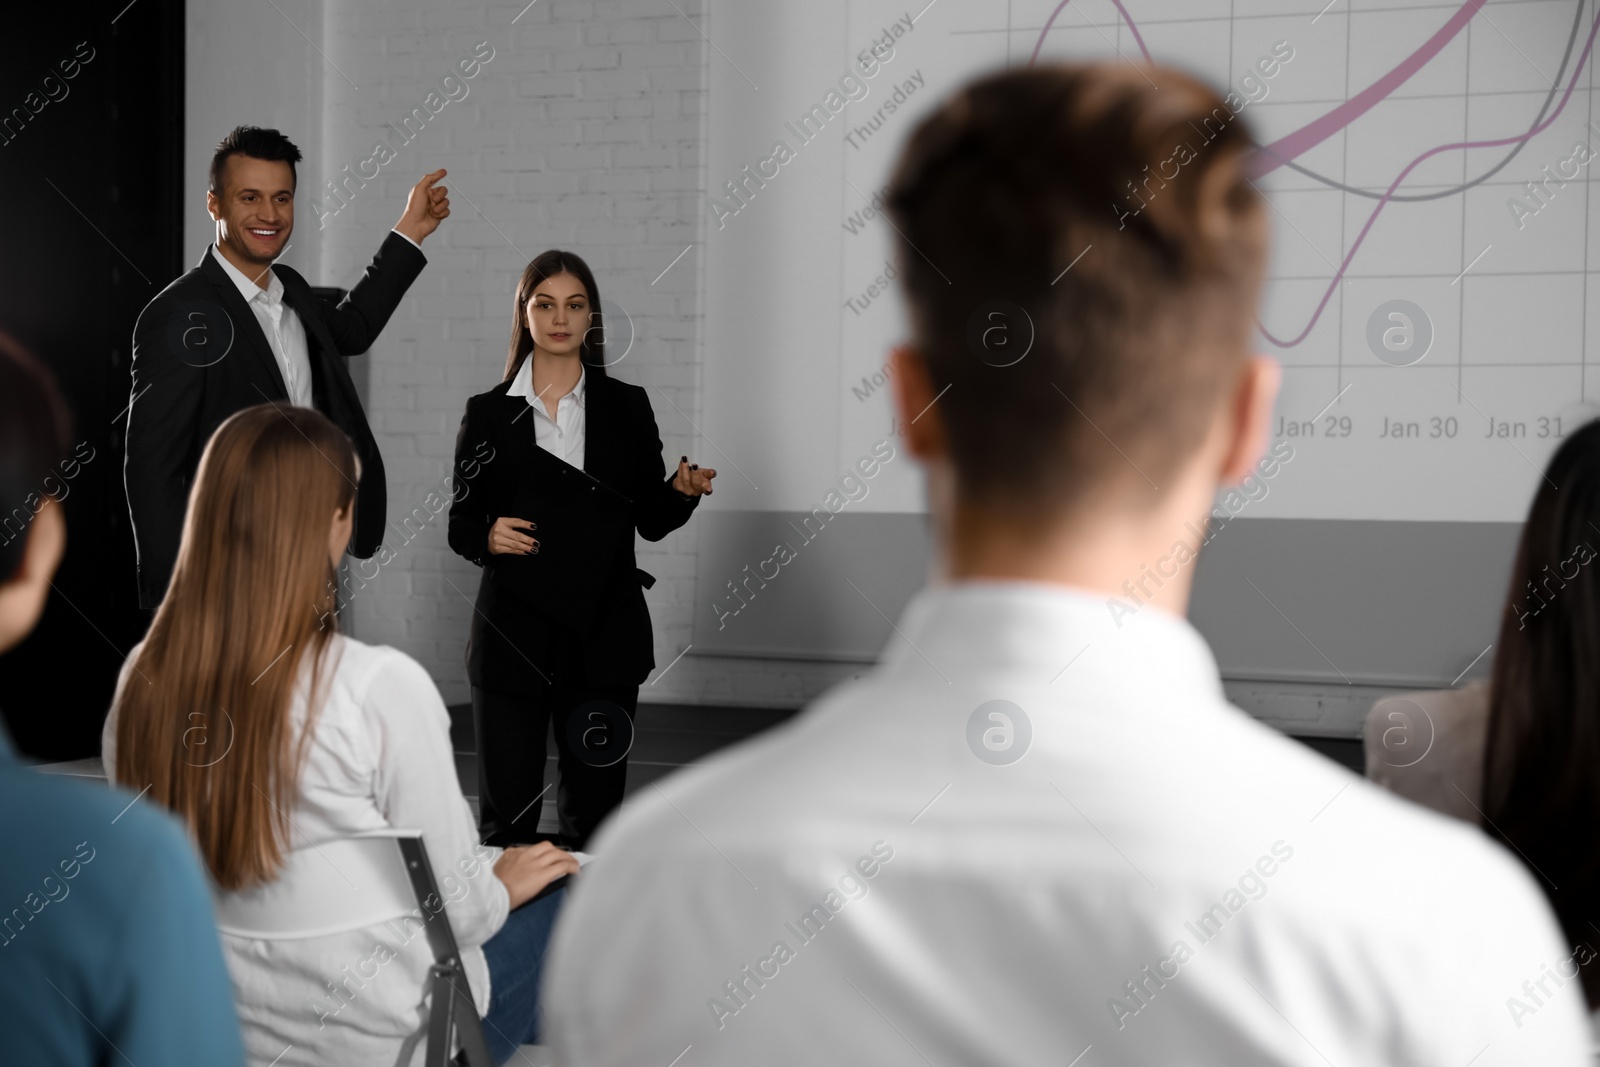 Photo of Business trainers giving lecture in conference room with projection screen